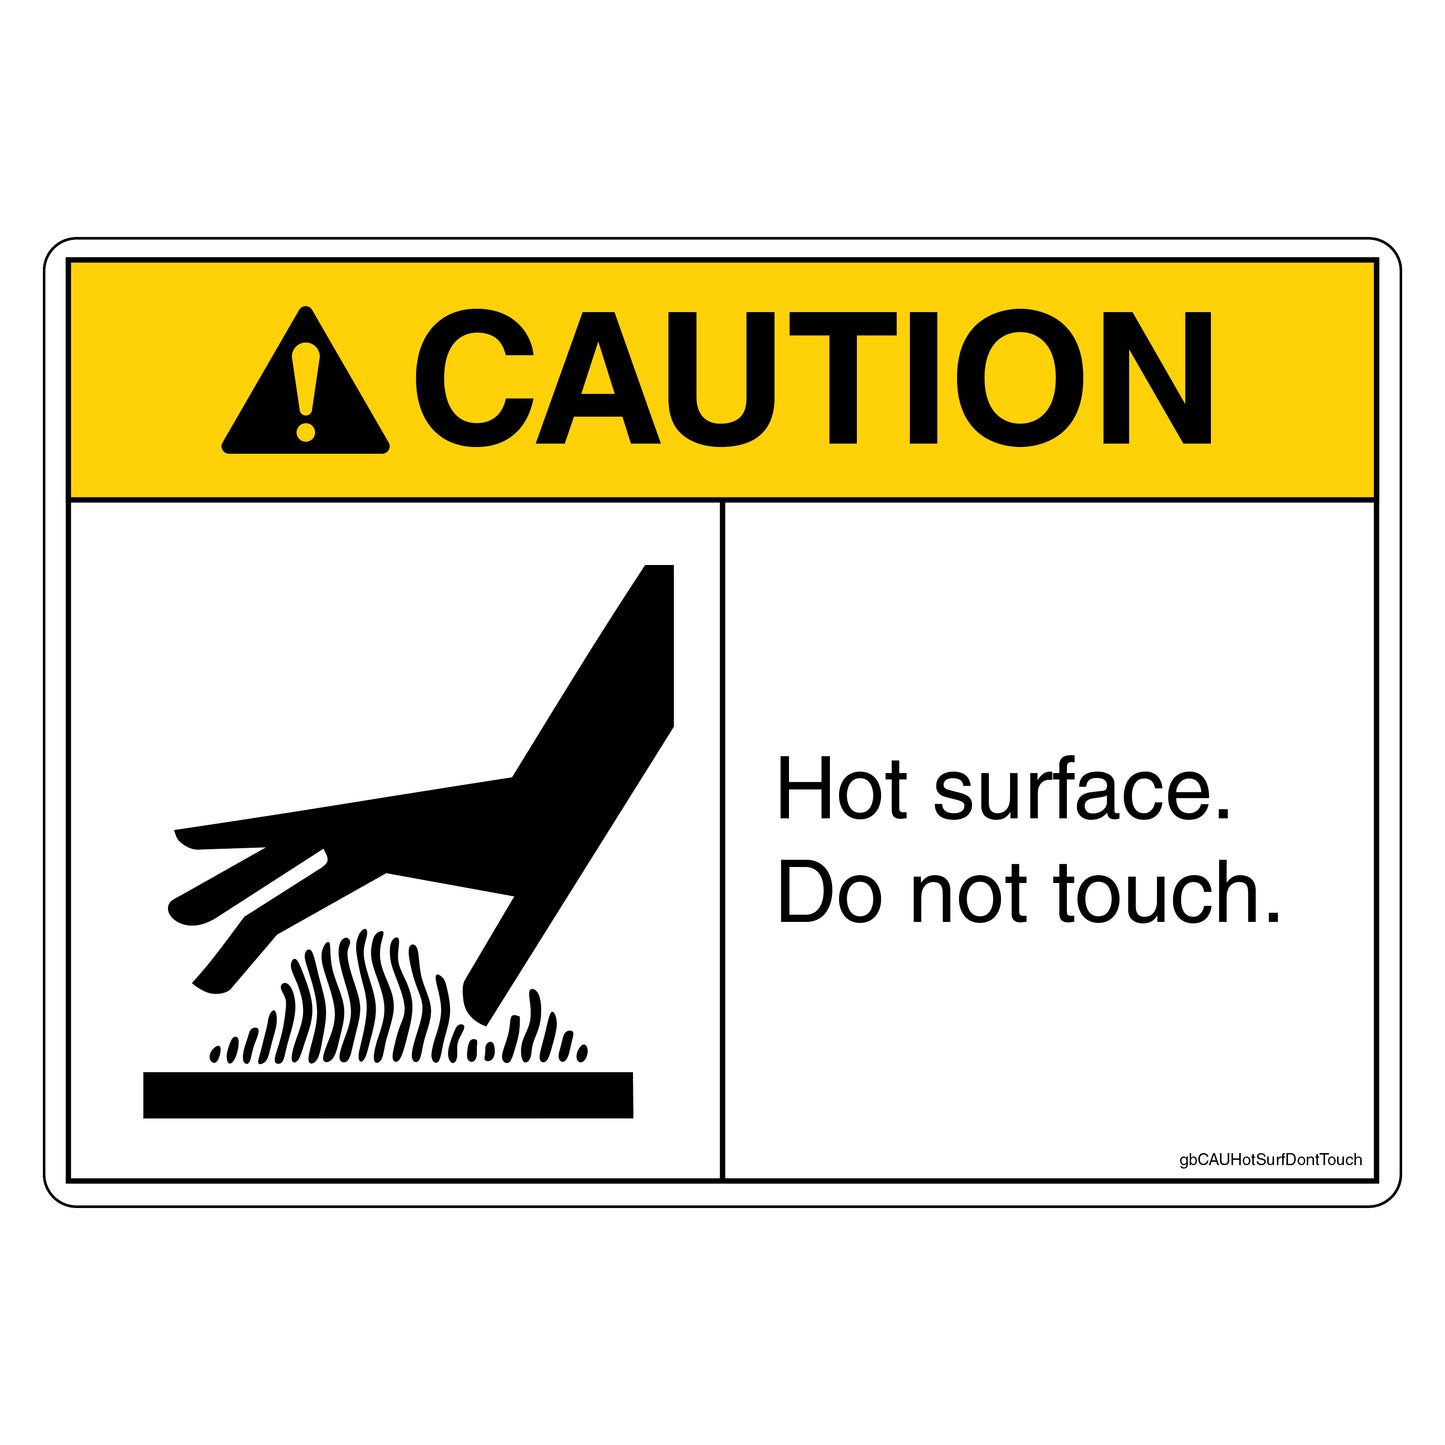 Caution Hot Surface Do Not Touch Decal.